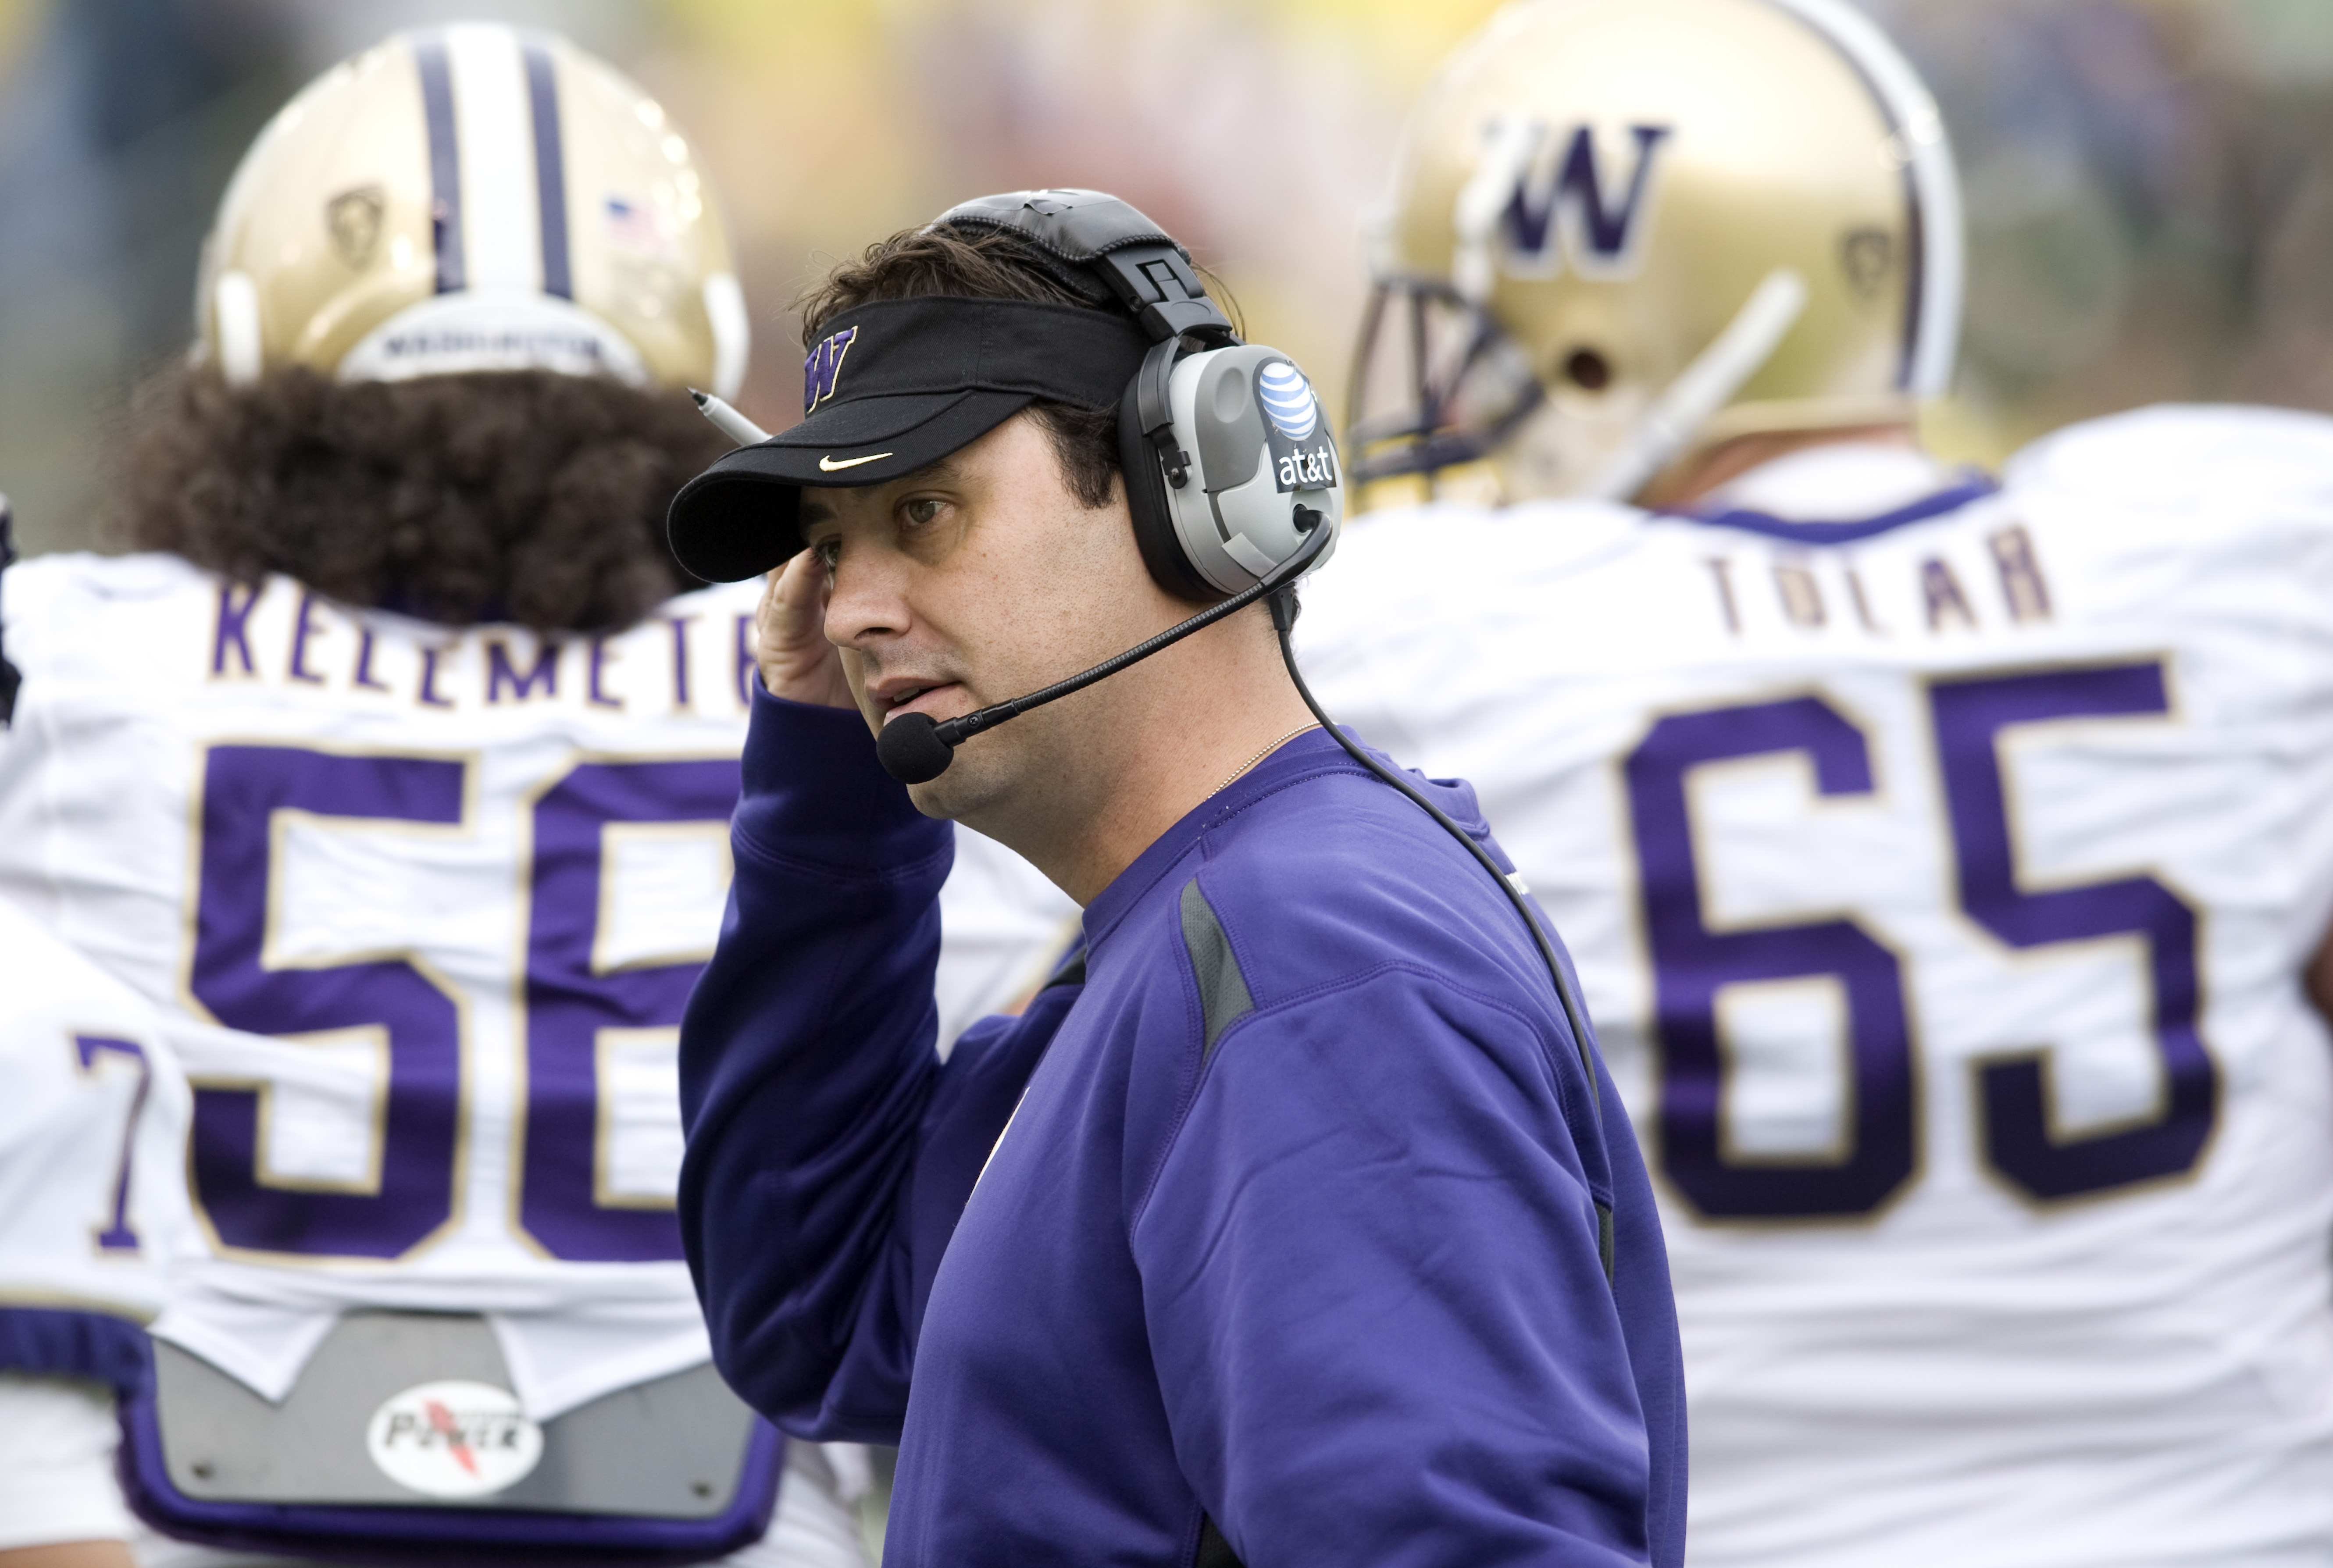 EUGENE, OR - NOVEMBER 6: Head coach Steve Sarkisian of the Washington Huskies works the sidelines in the second quarter of the game against the Oregon Ducks at Autzen Stadium on November 6, 2010 in Eugene, Oregon. (Photo by Steve Dykes/Getty Images)